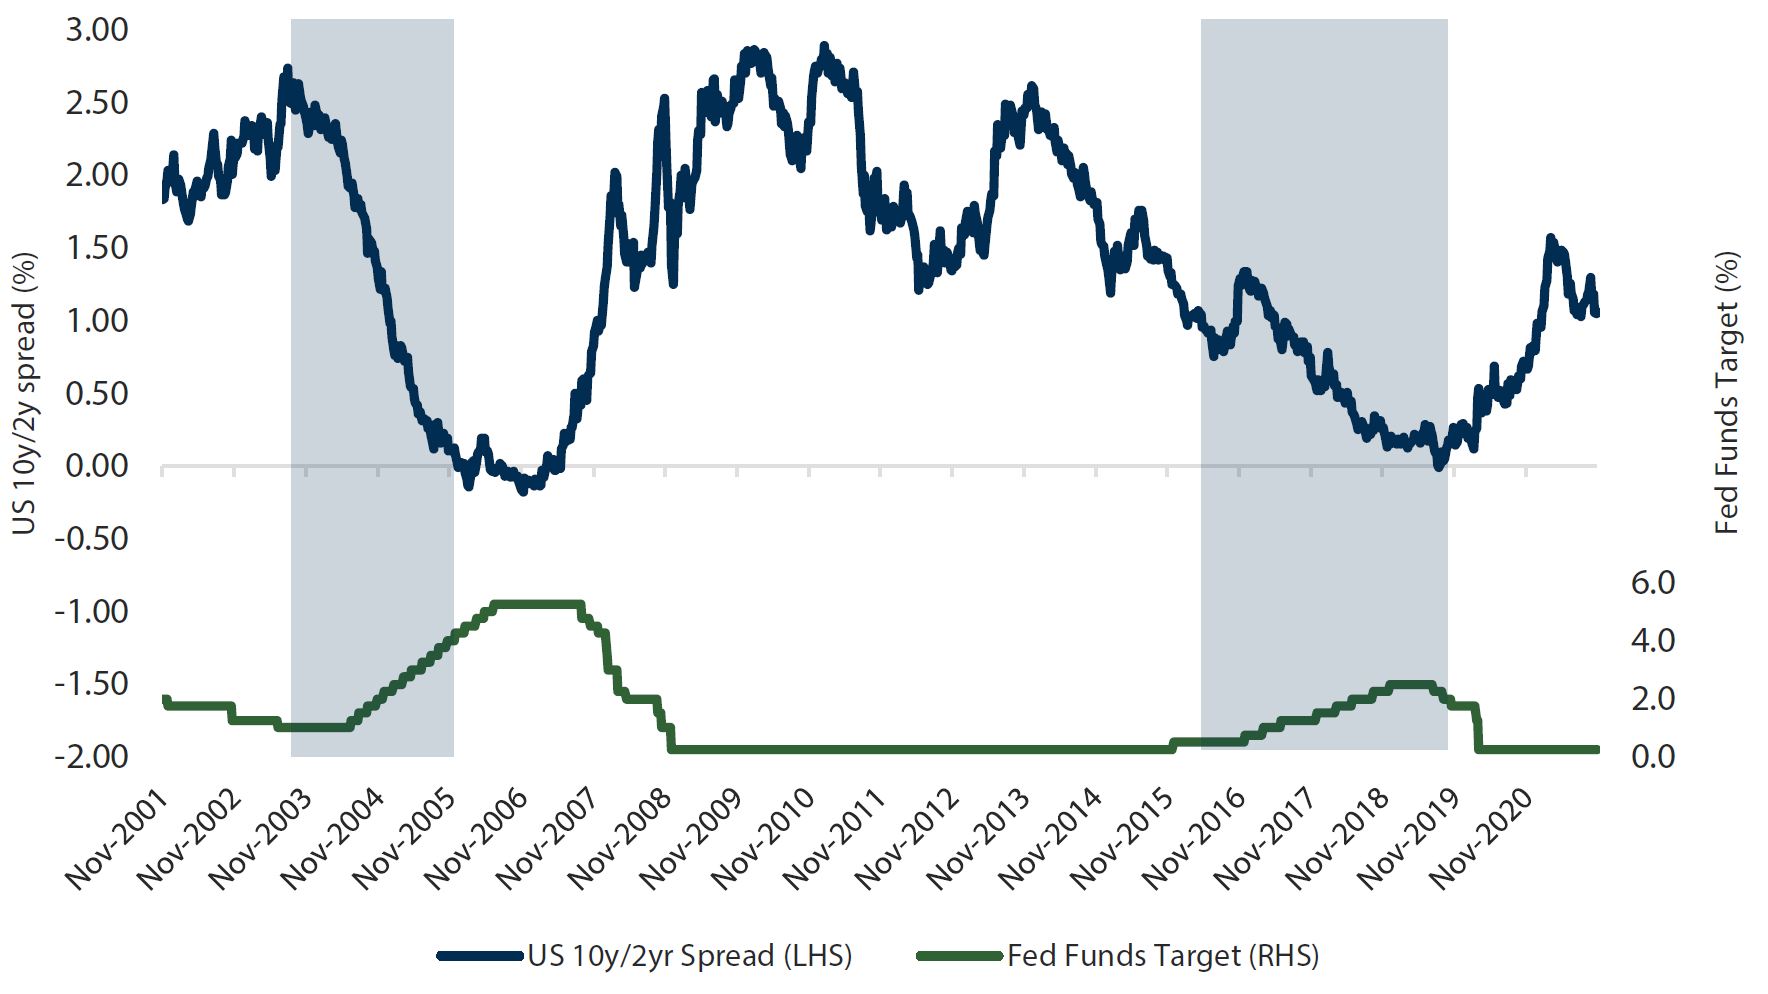 Chart 4: UST yield curve and Fed Funds target